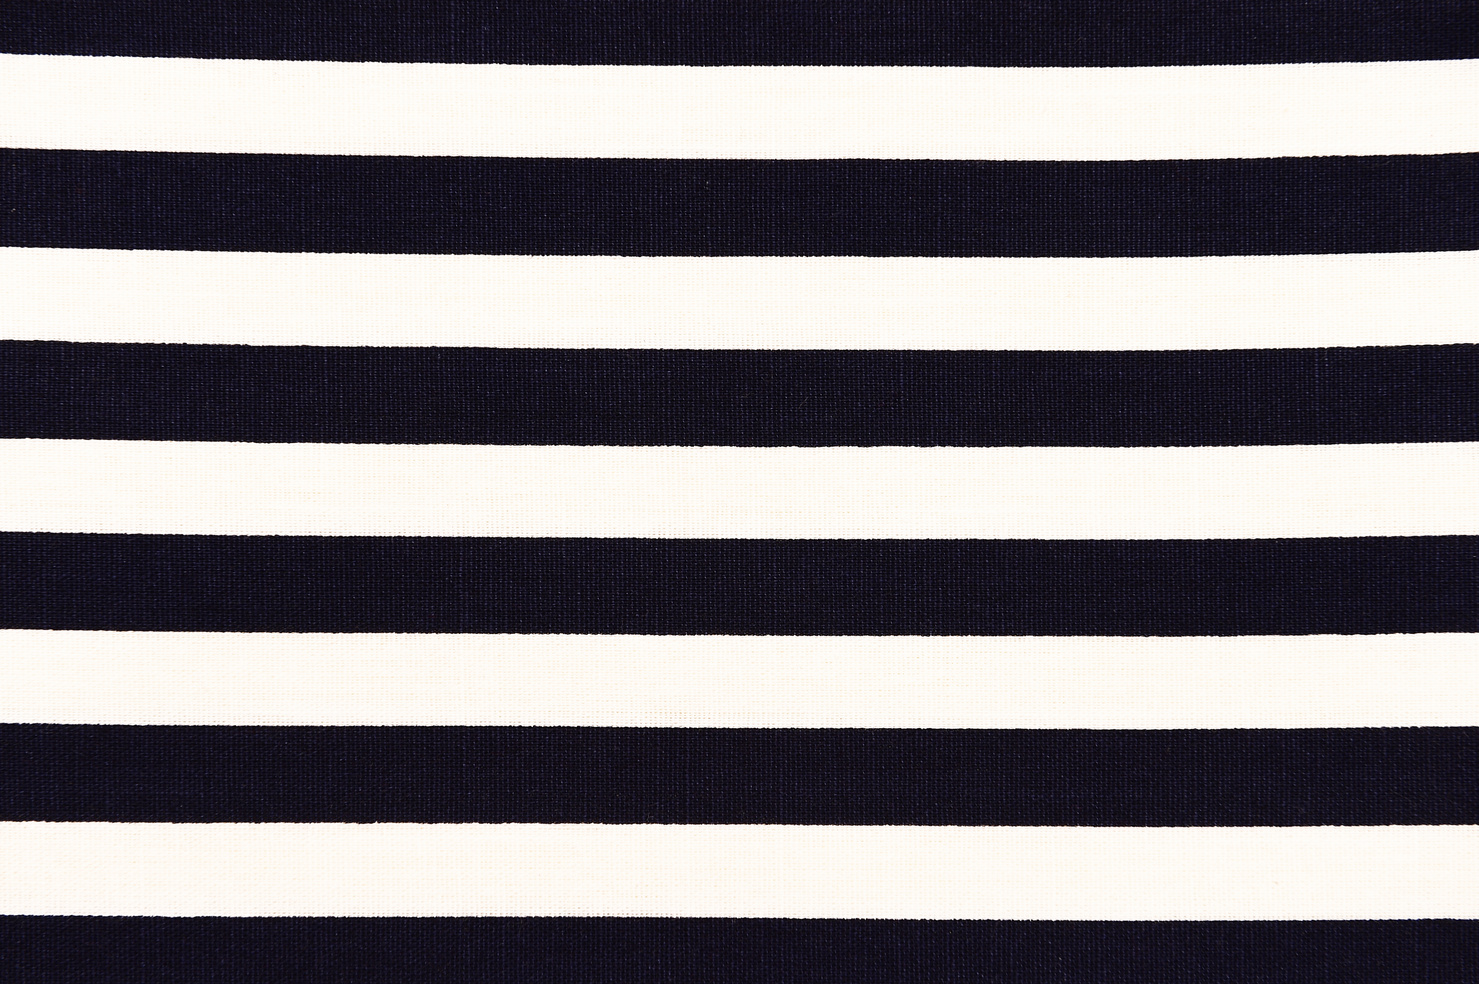 white and black striped fabric texture